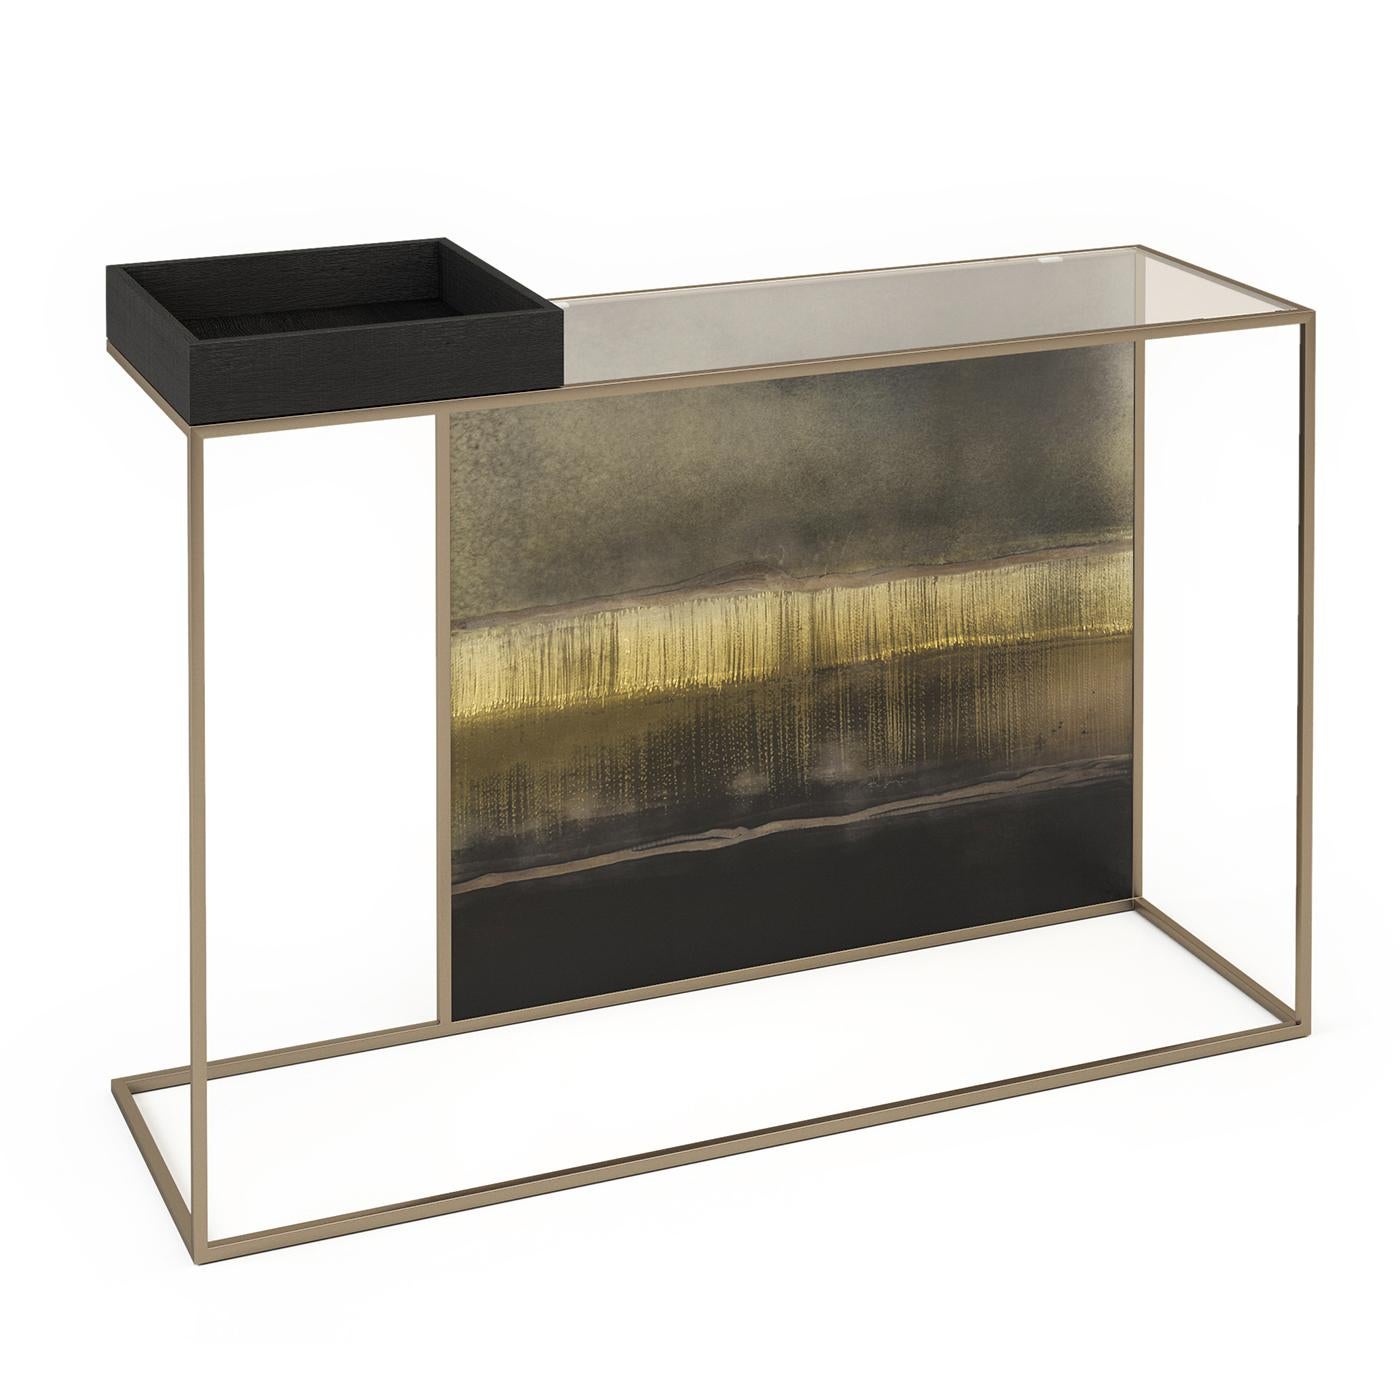 Introducing a console that seamlessly marries elegance and craftsmanship. The burnished brass-finished metal frame supports an extra-clear acid-etched glass back adorned with the Lipari decor. The wooden box, finished in brushed durmast with a sleek